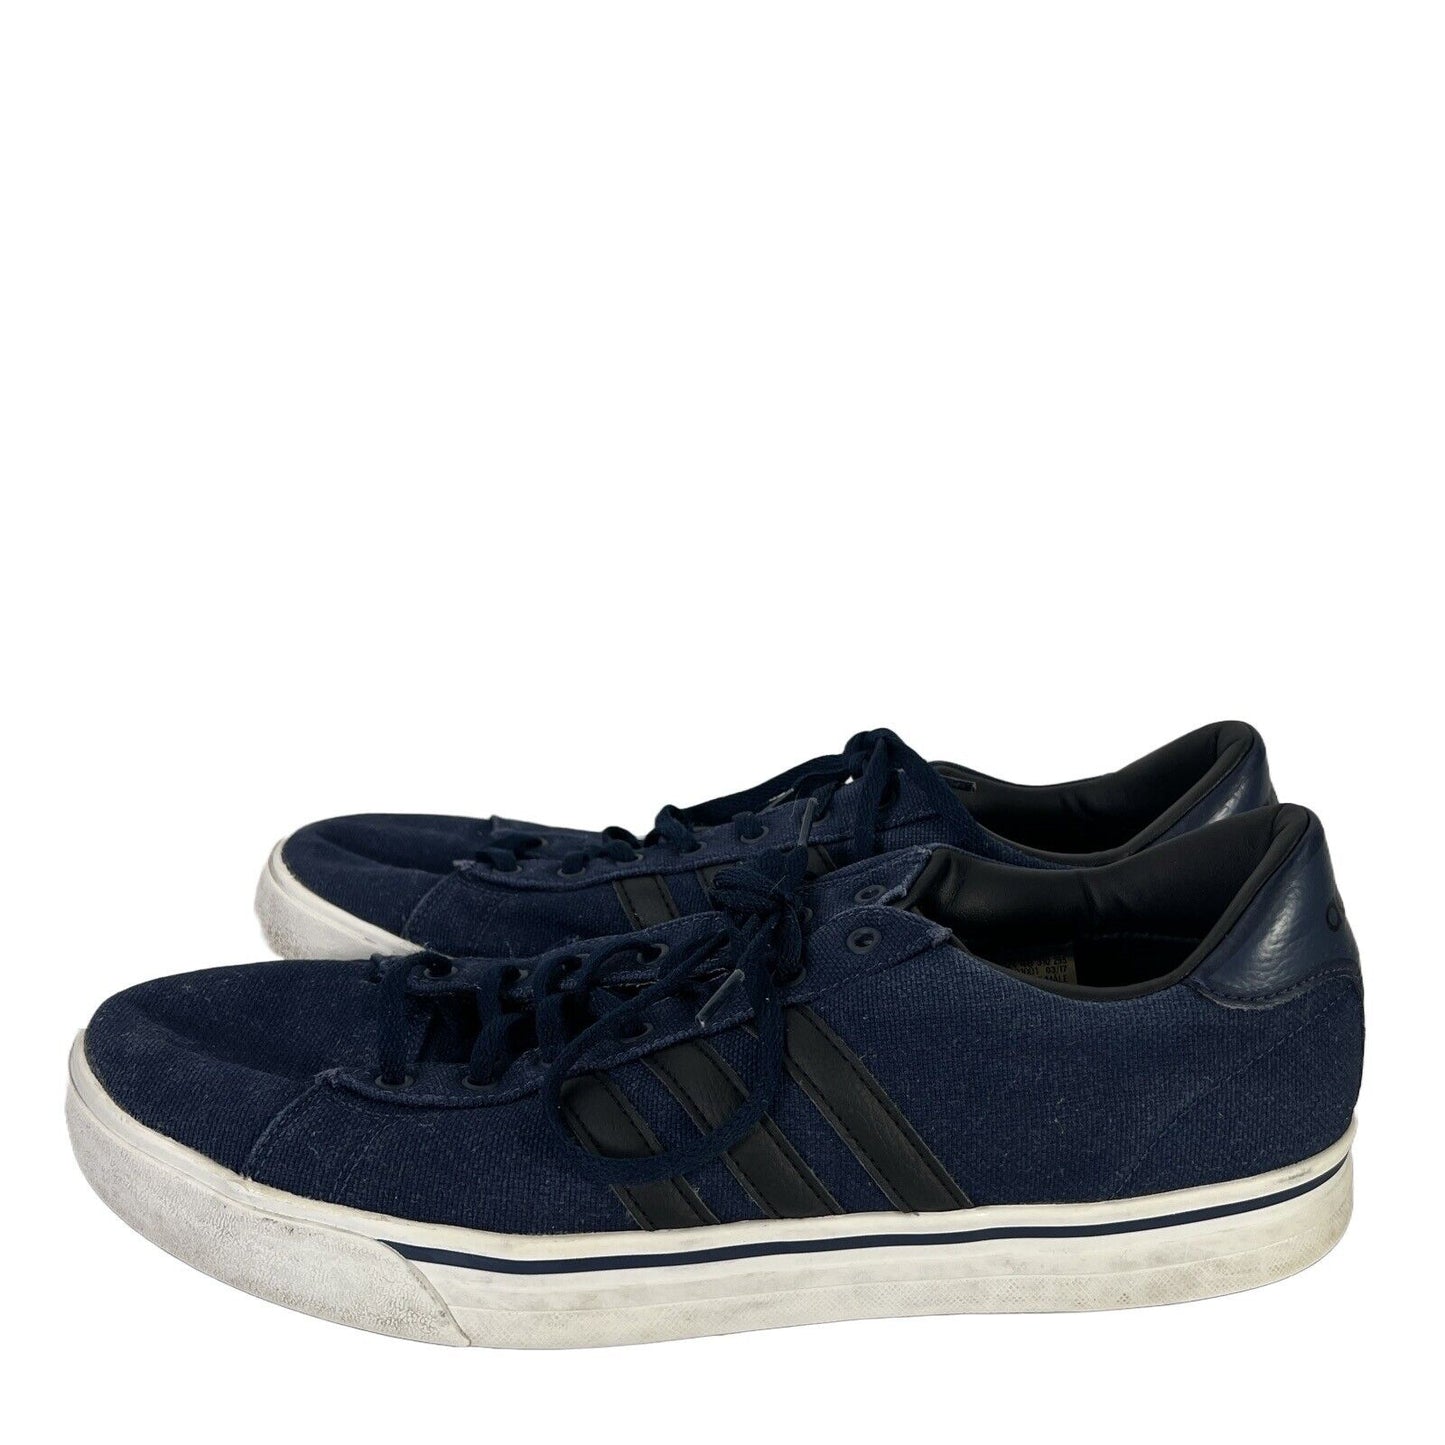 Adidas Men's Blue Cloudfoam Super Daily Lace Up Sneakers - 13